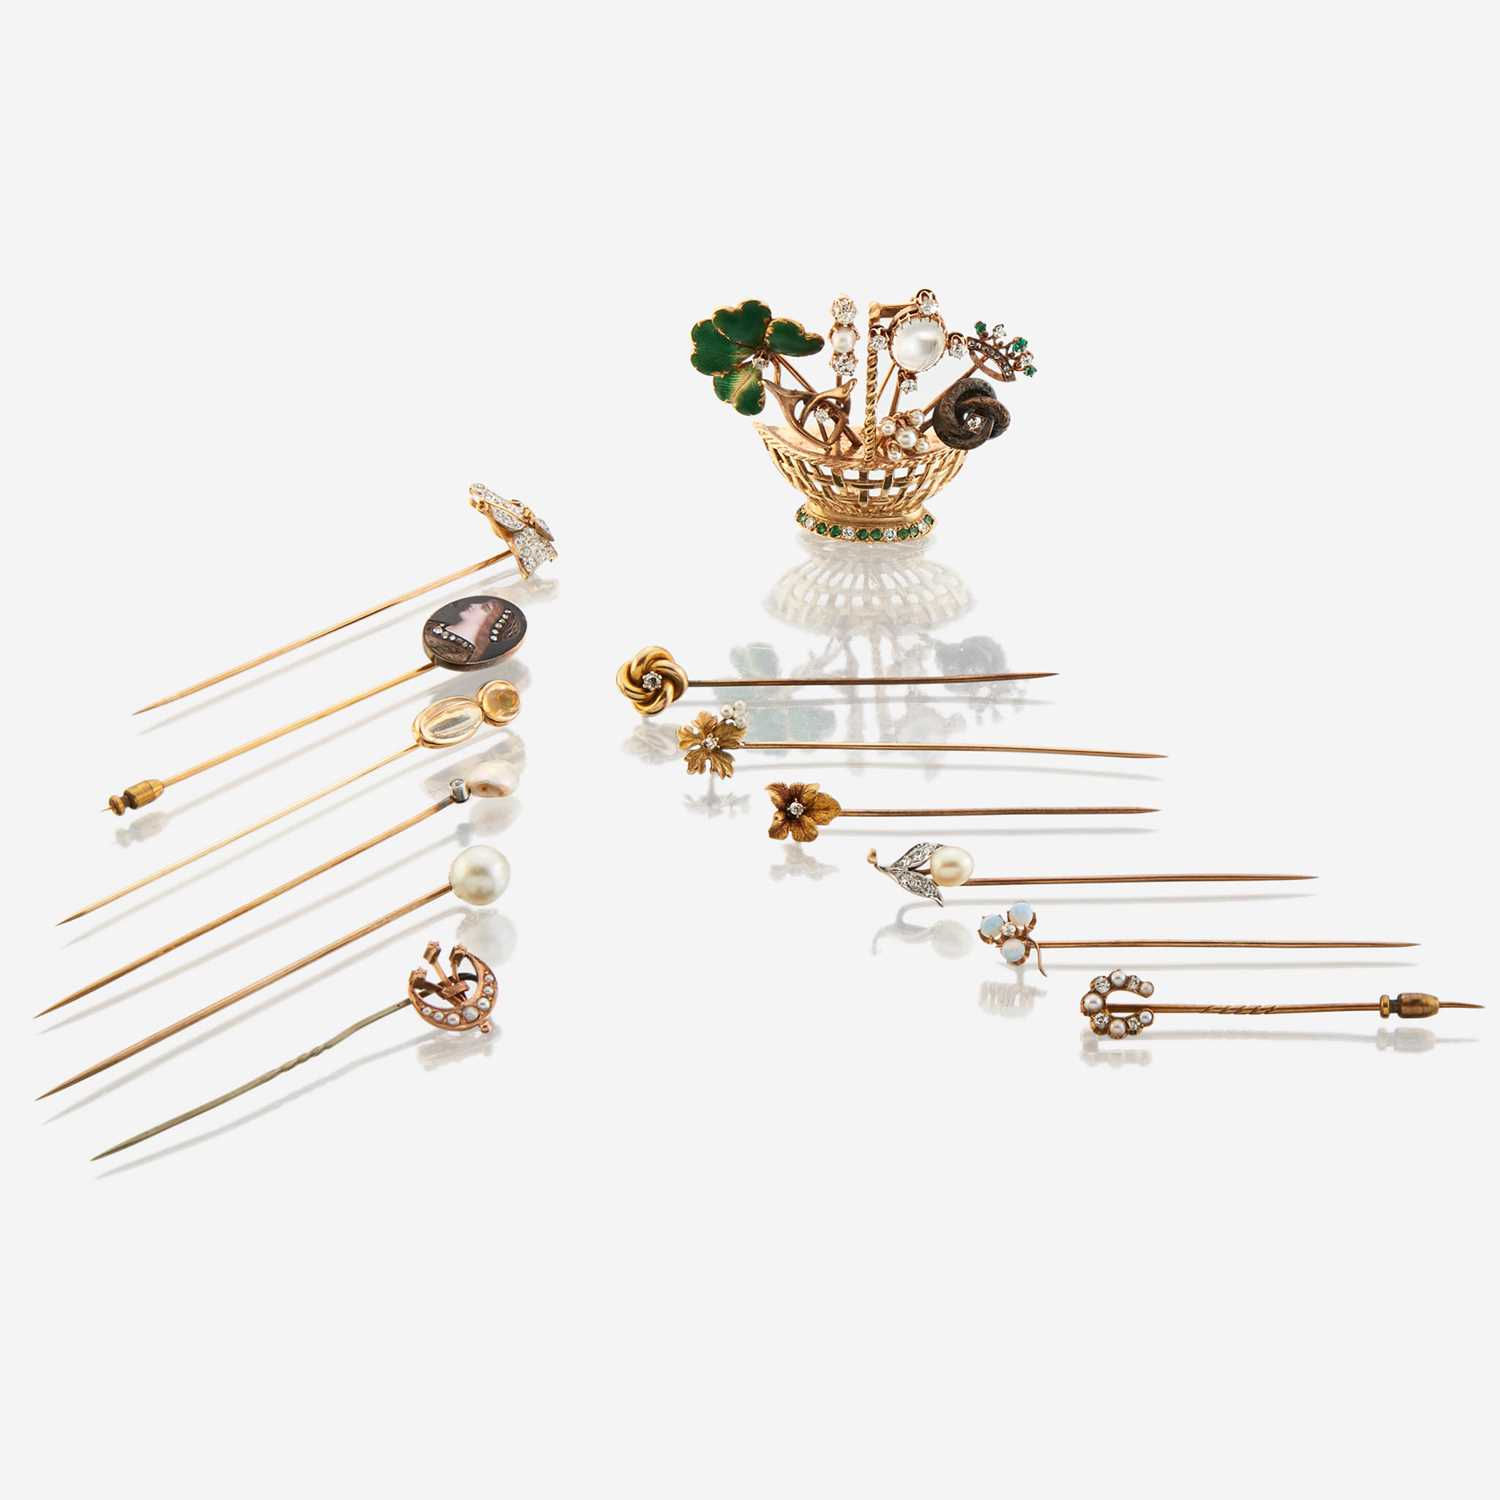 Lot 55 - A collection of twelve gold and gem-set stick pins with brooch